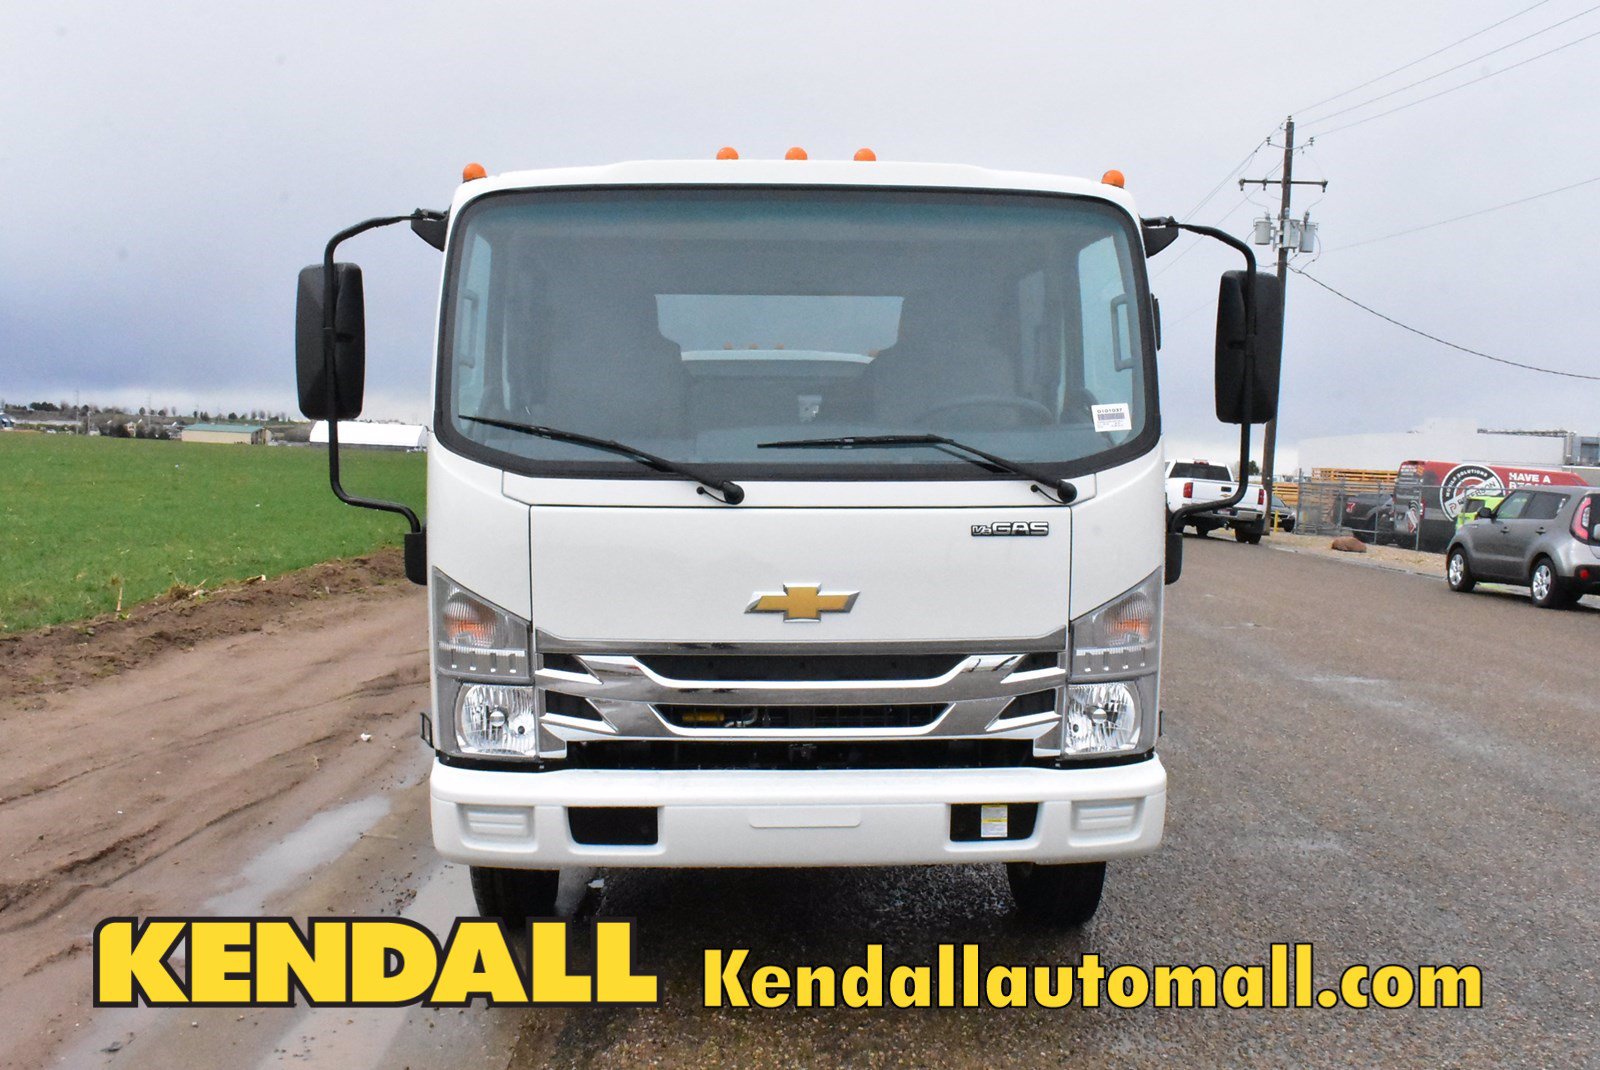 New 2020 Chevrolet 4500 LCF Gas in Nampa #D101038 | Kendall at the